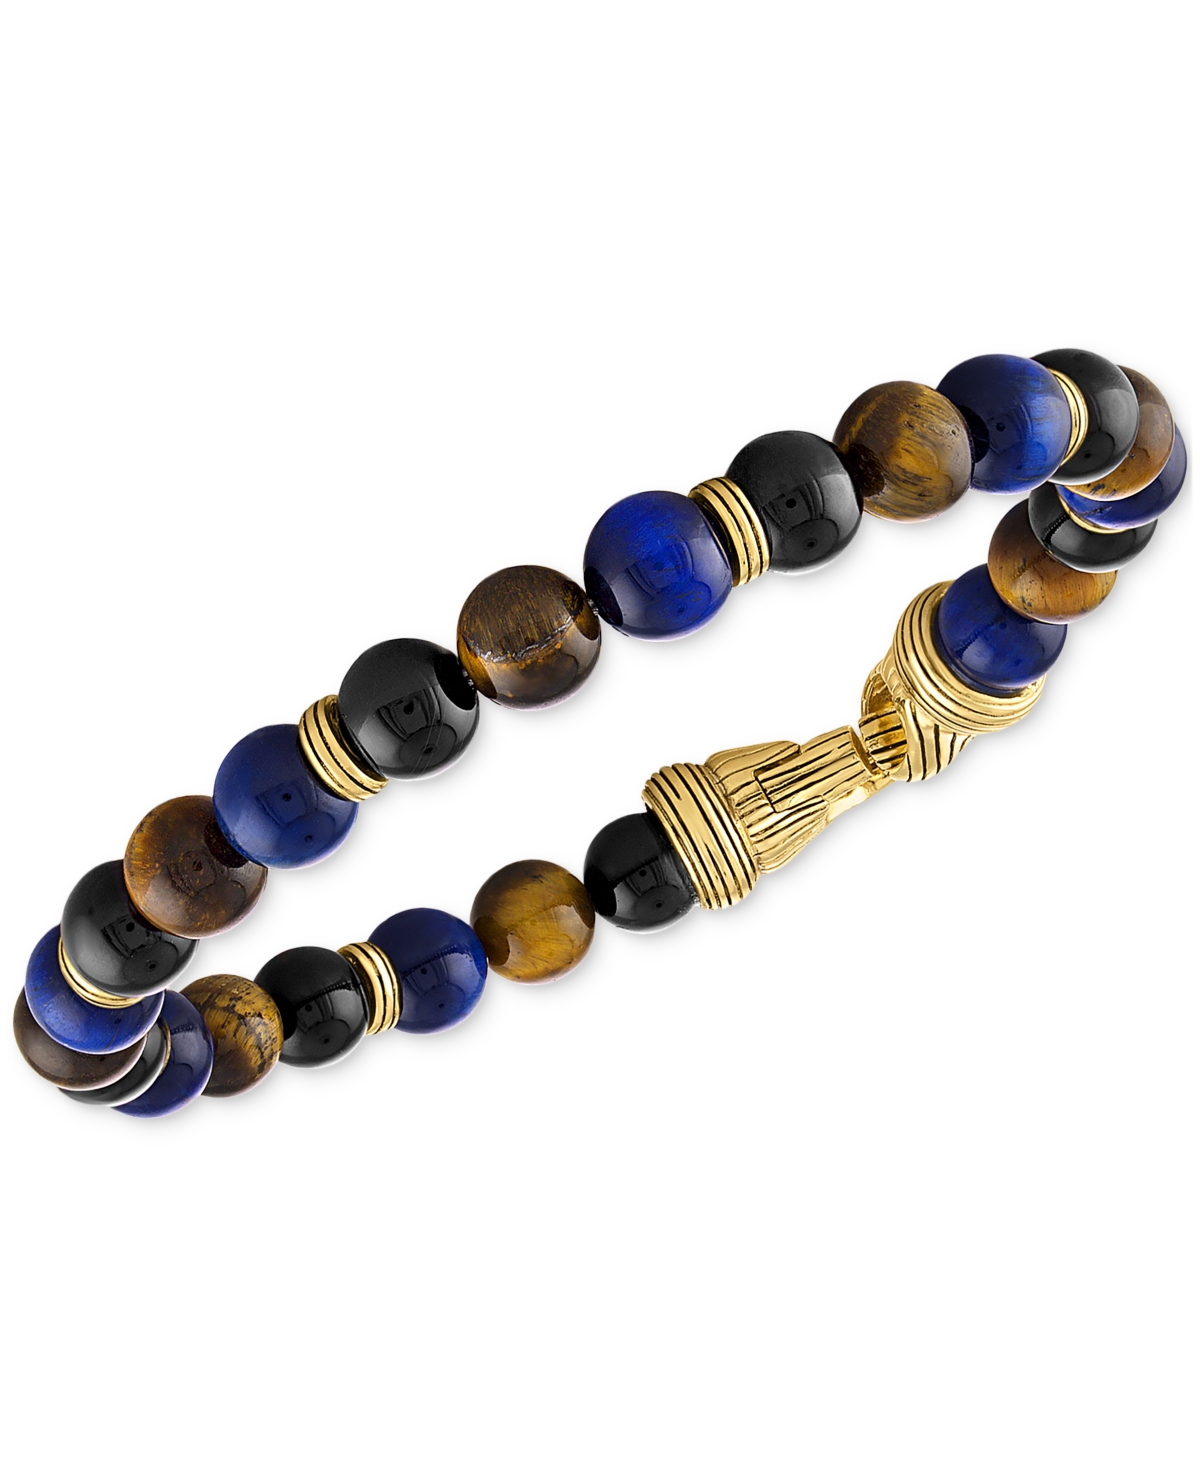 Multi-Stone Beaded Bracelet in 14k Gold-Plated Sterling Silver, Created for Macy's - Multi